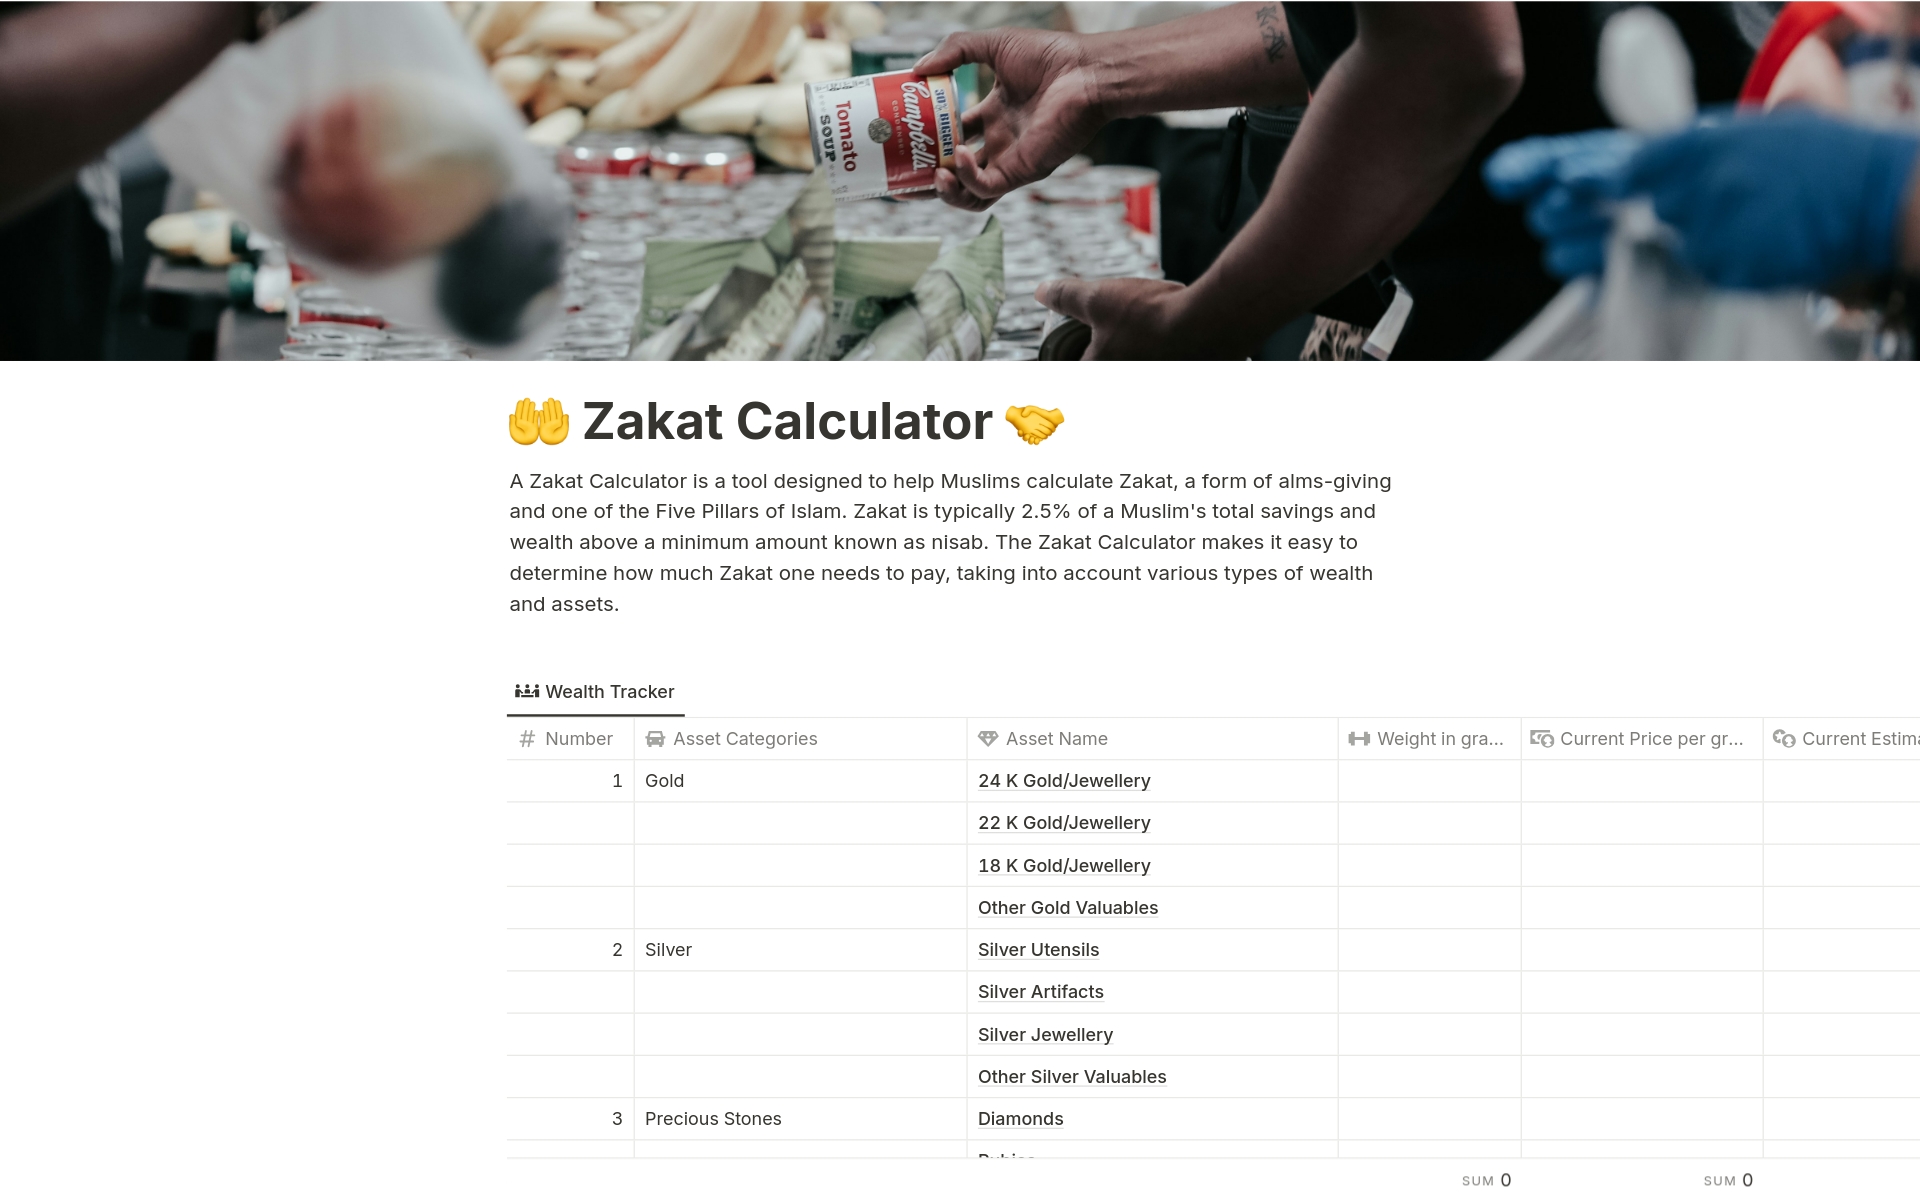 A Zakat Calculator is a tool designed to help Muslims calculate Zakat, a form of alms-giving and one of the Five Pillars of Islam. Zakat is typically 2.5% of a Muslim's total savings and wealth above a minimum amount known as Nisab. 